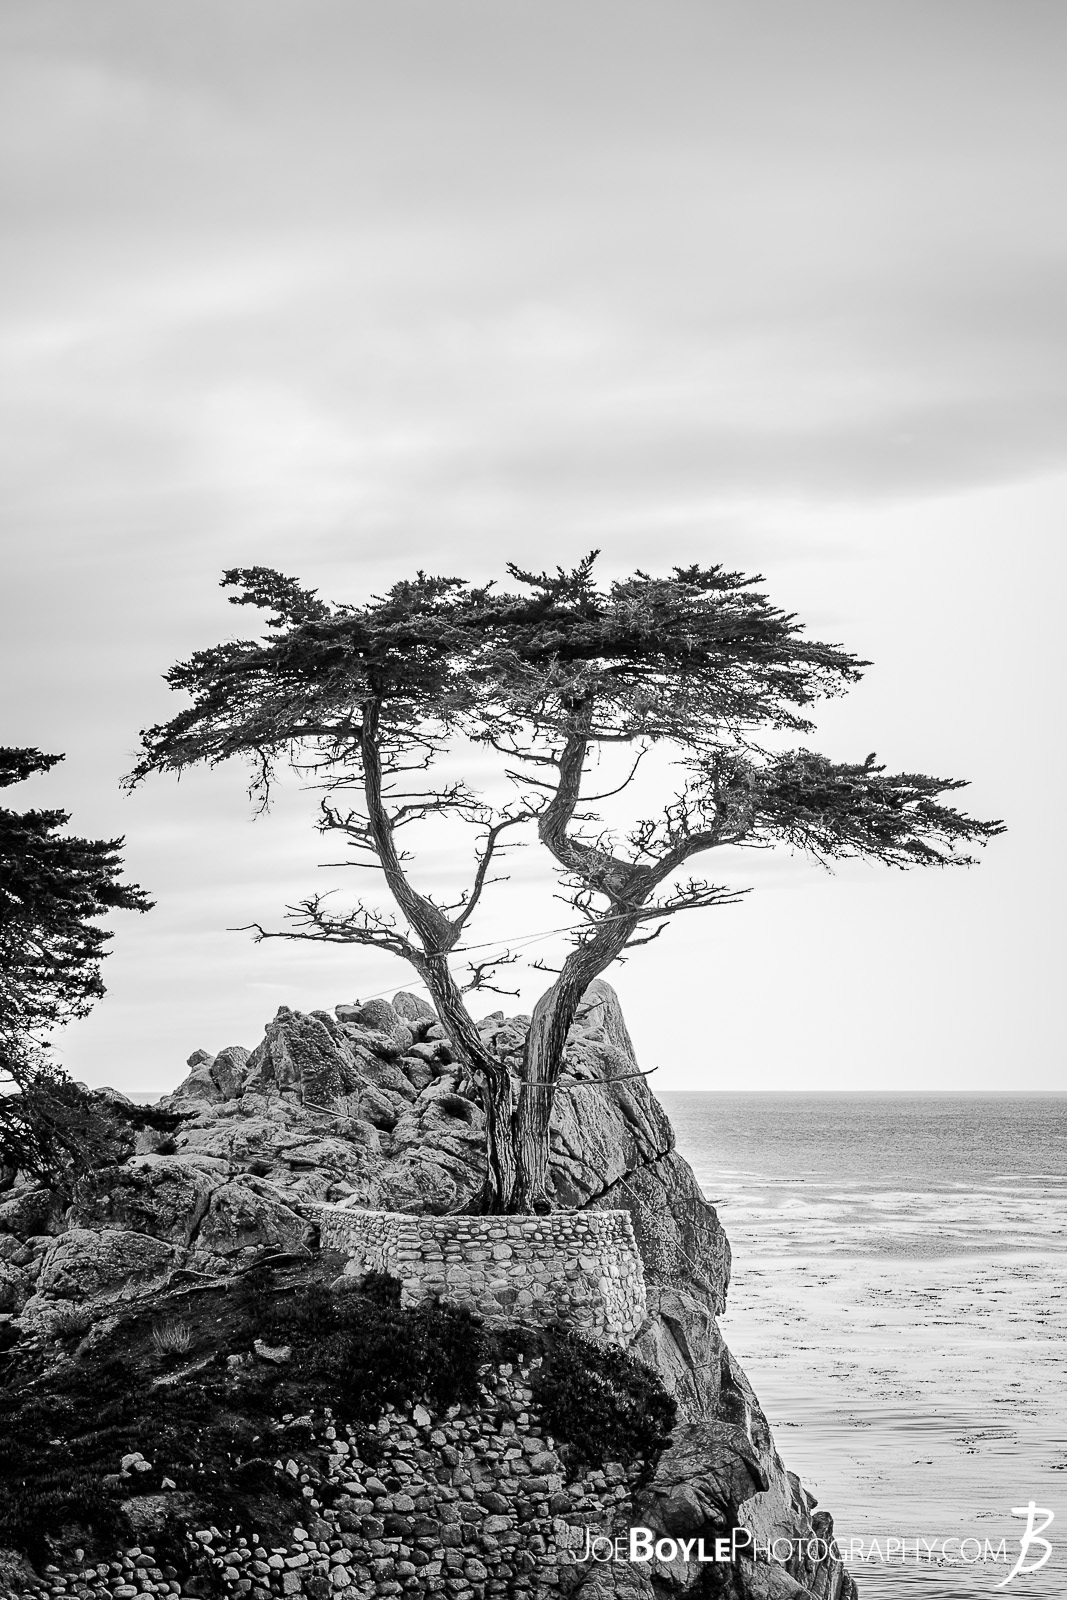  When I was traveling to California I made it a point travel along the gorgeous 17 Mile Drive near Carmel by the Sea. There were many attractions on the drive including otters, sea lions and of course the infamous Lonely Cypress Tree 